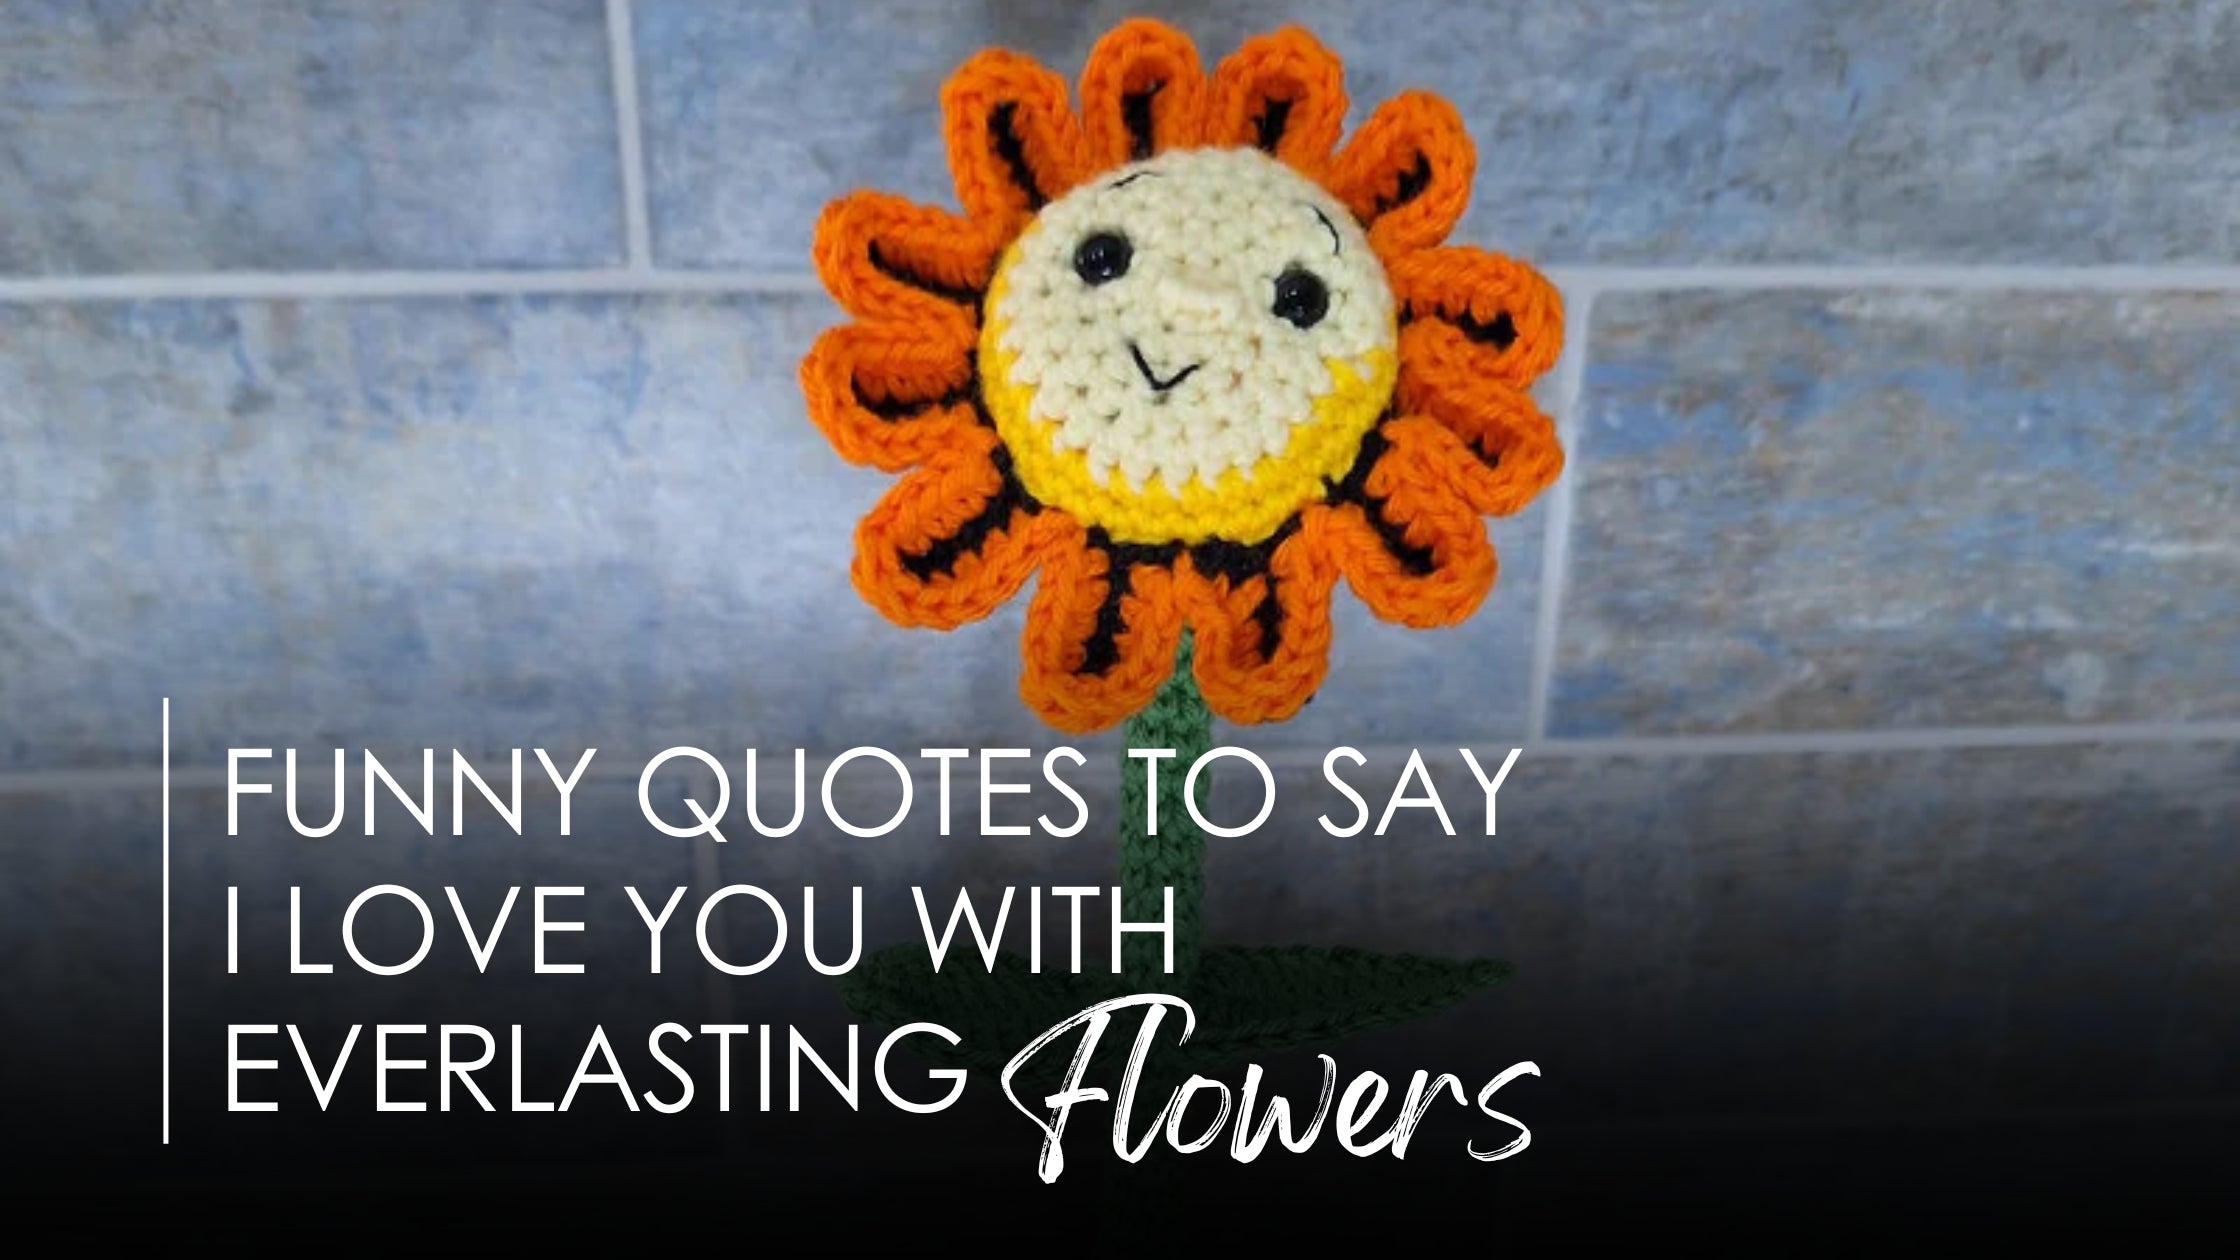 Funny Quotes for Expressing Love with Everlasting Flowers